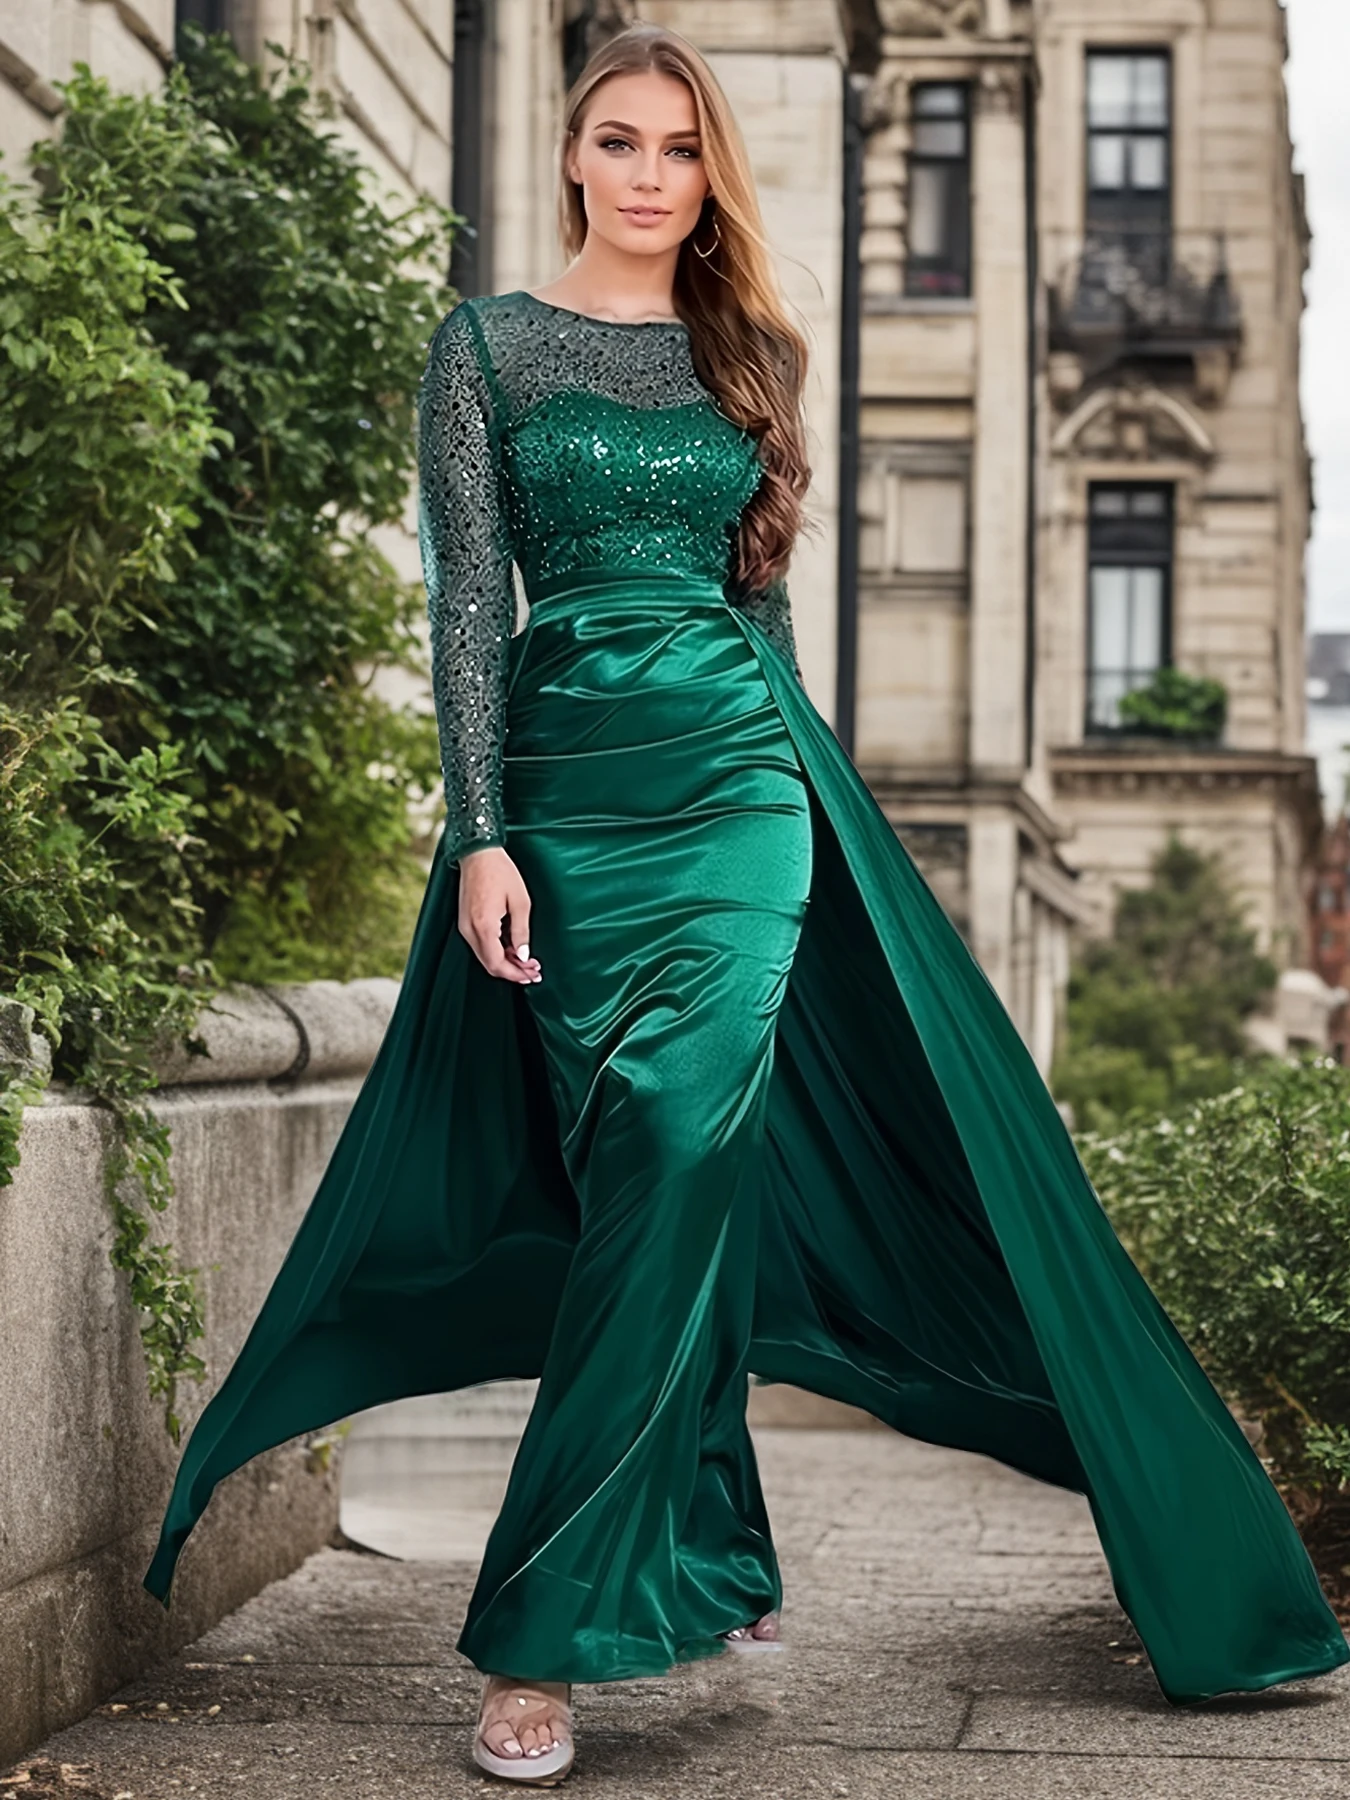 

Green O Neck See-through Long Sleeves Evening Dress Sequin Detachable Train Women Dresses Cocktail Prom Gown For Wedding Party